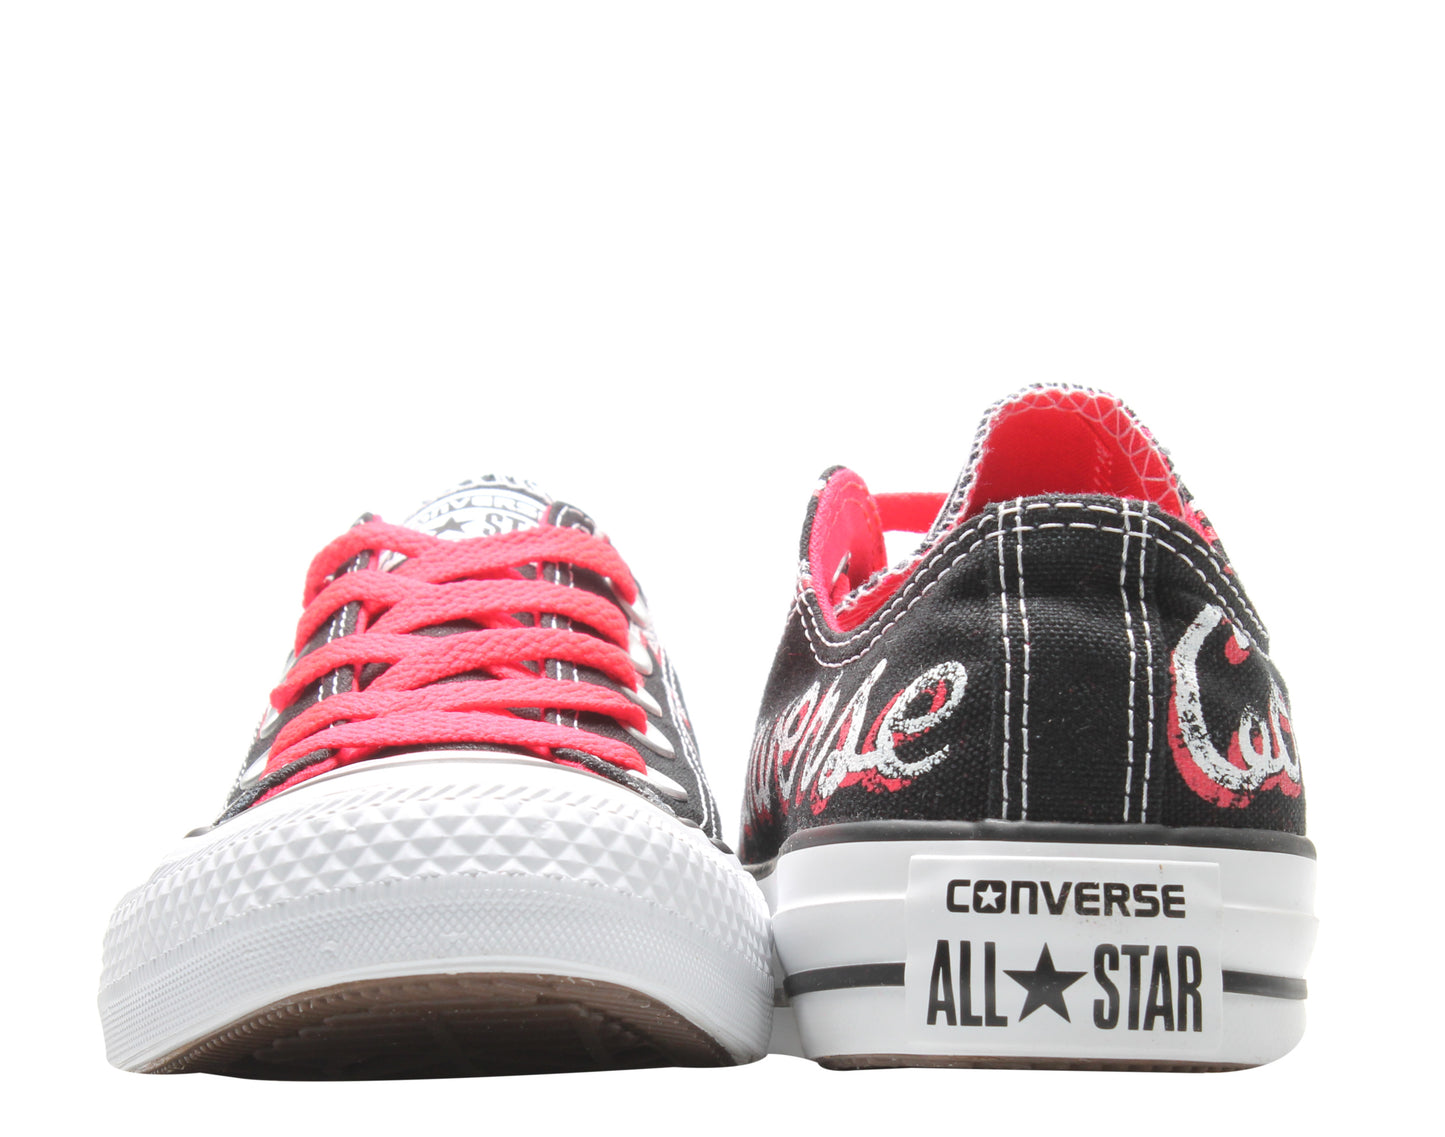 Converse Chuck Taylor All Star Ox Branded Black/Infrared Low Top Sneakers 142396C